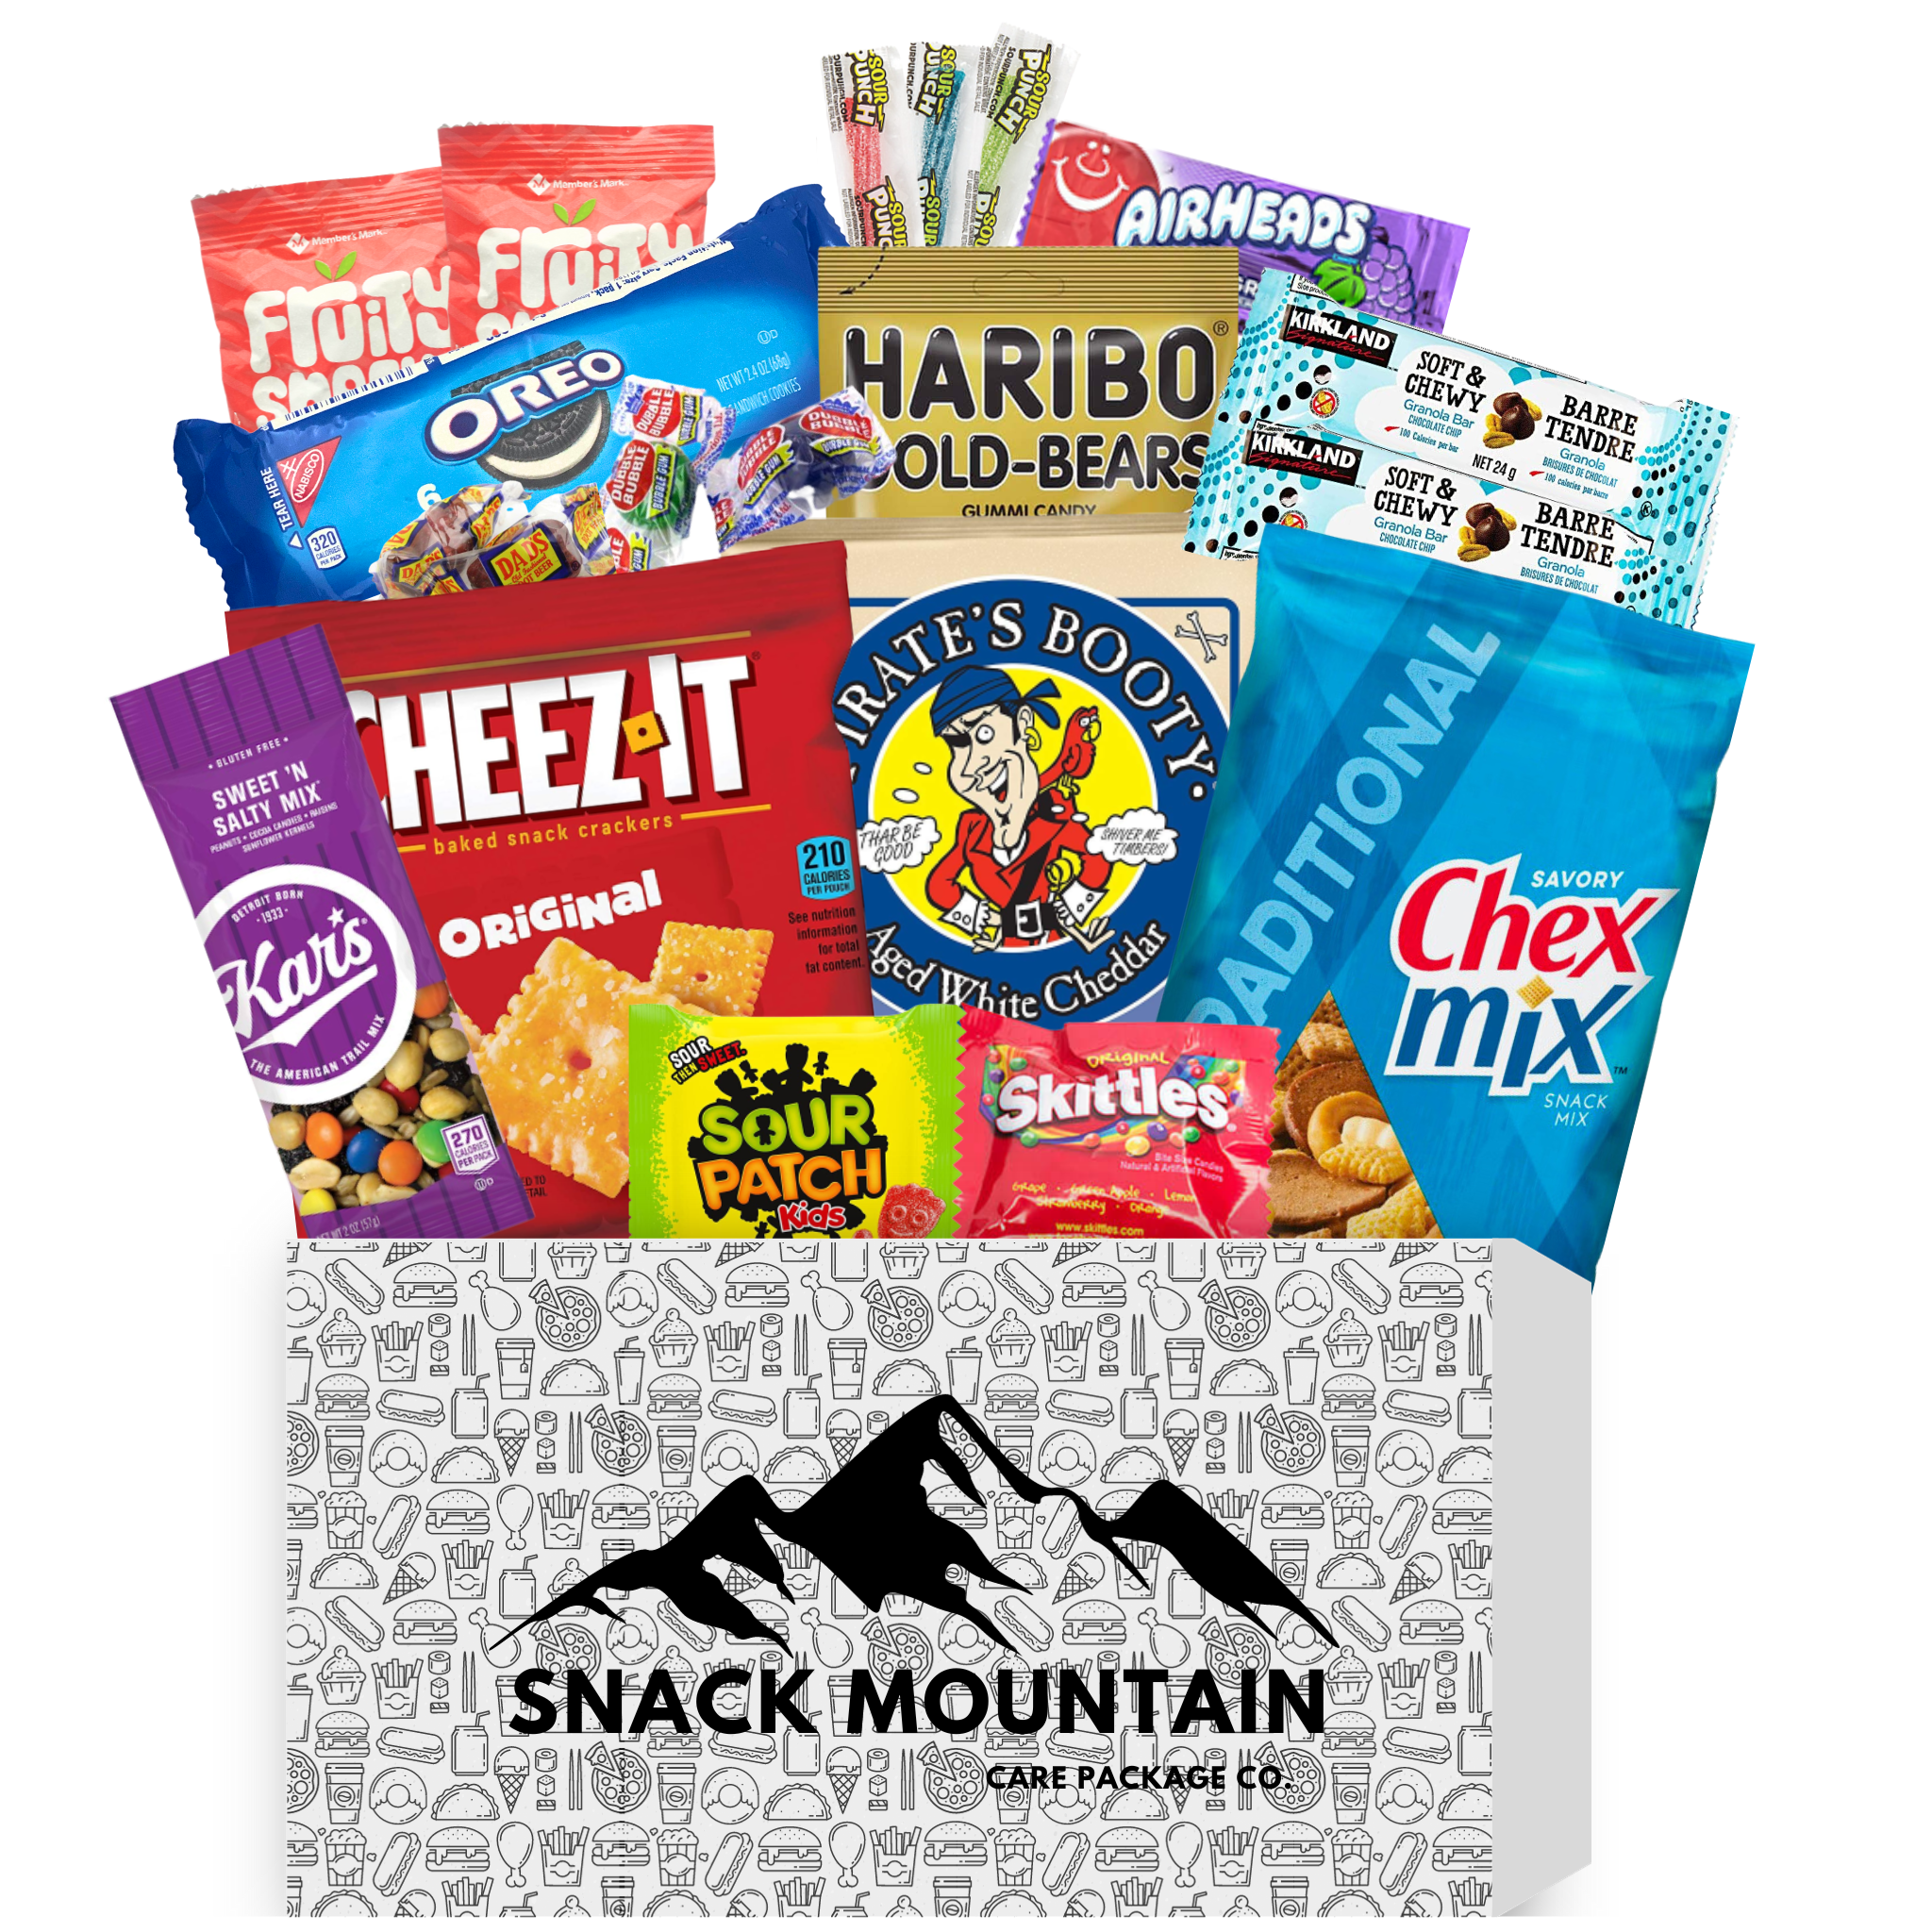 Snack Box Remix - |  20 Count Hand-Packed Care Package - snackmtn